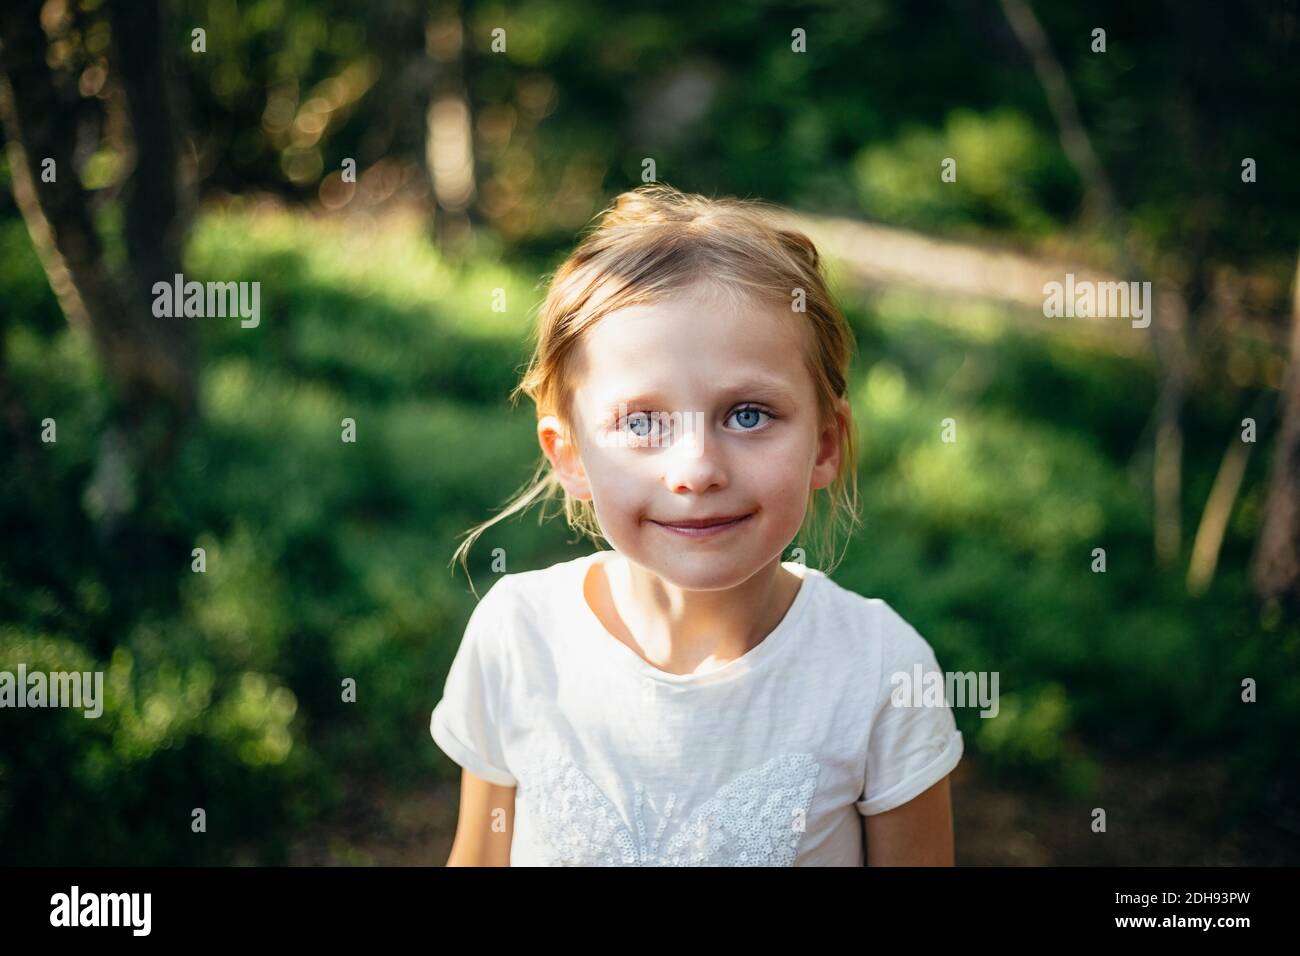 Portrait of smiling girl standing in forest Stock Photo